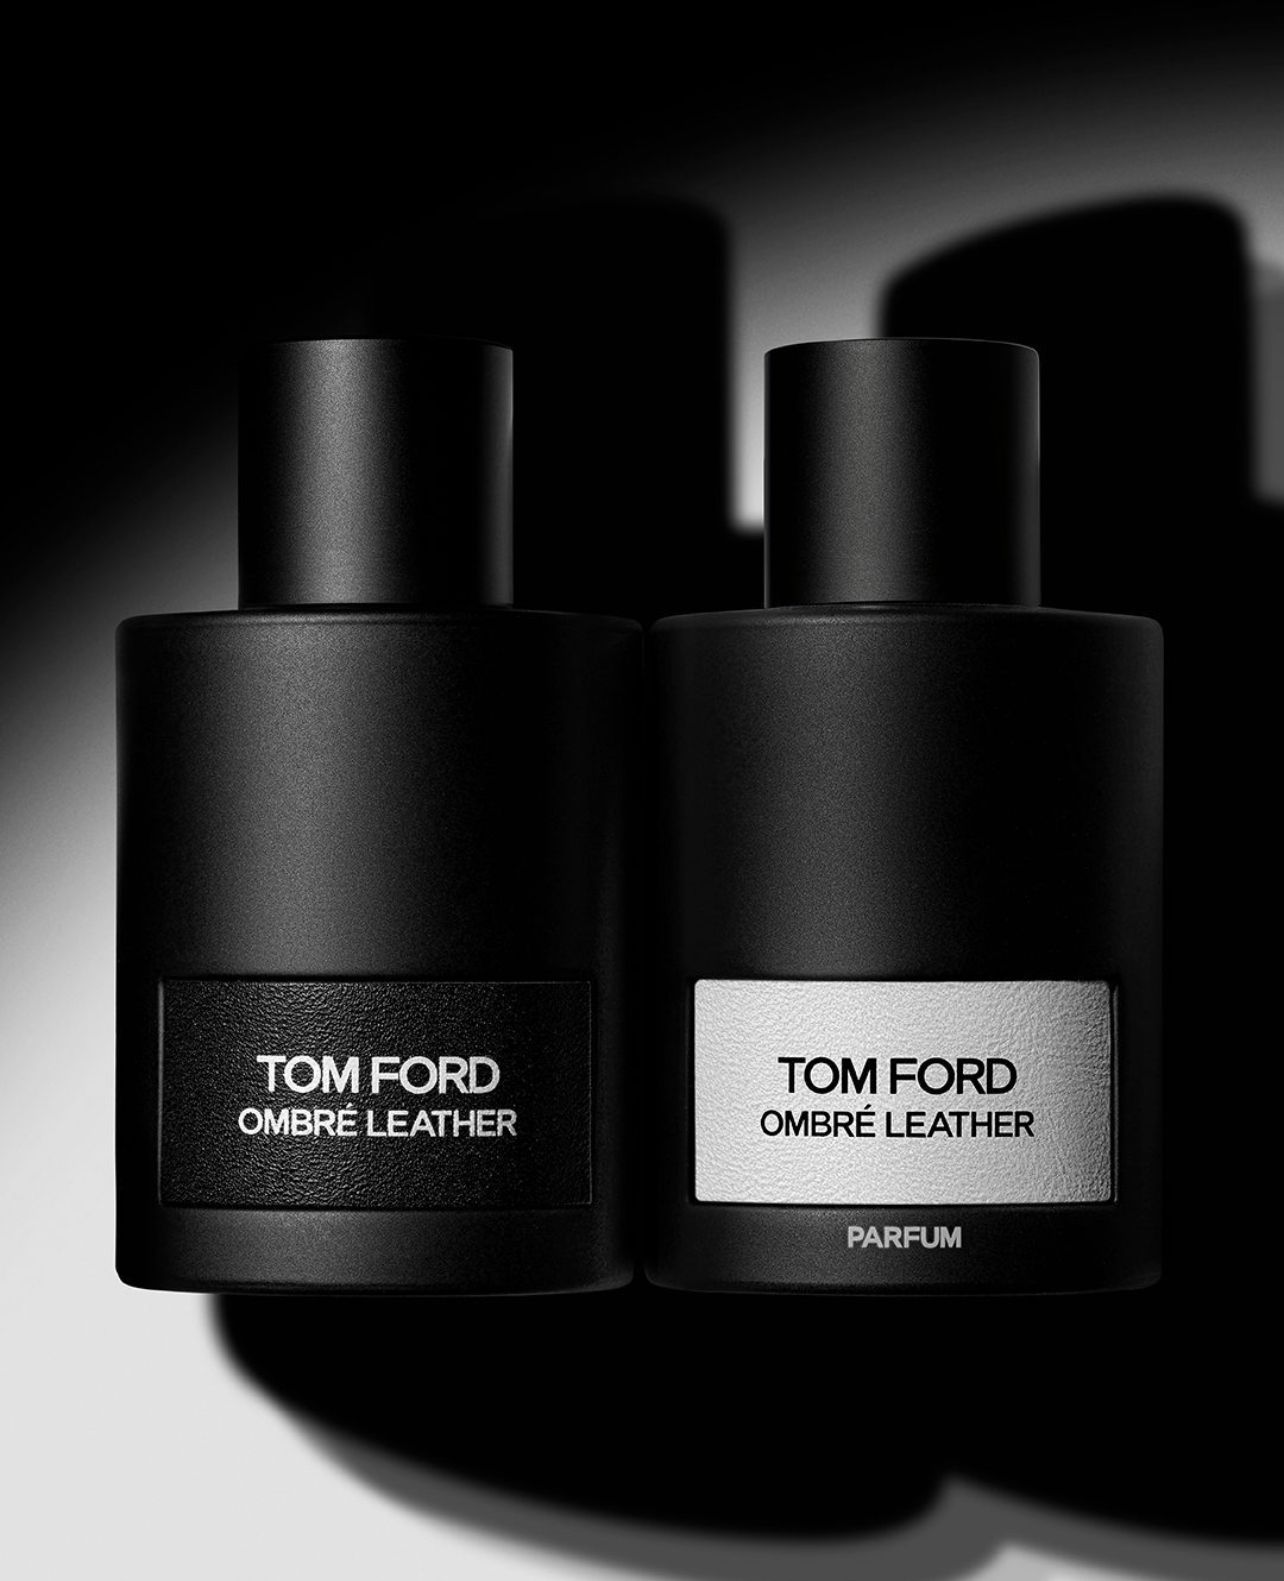 Ombre Leather Parfum Tom Ford perfume - a new fragrance for women and ...